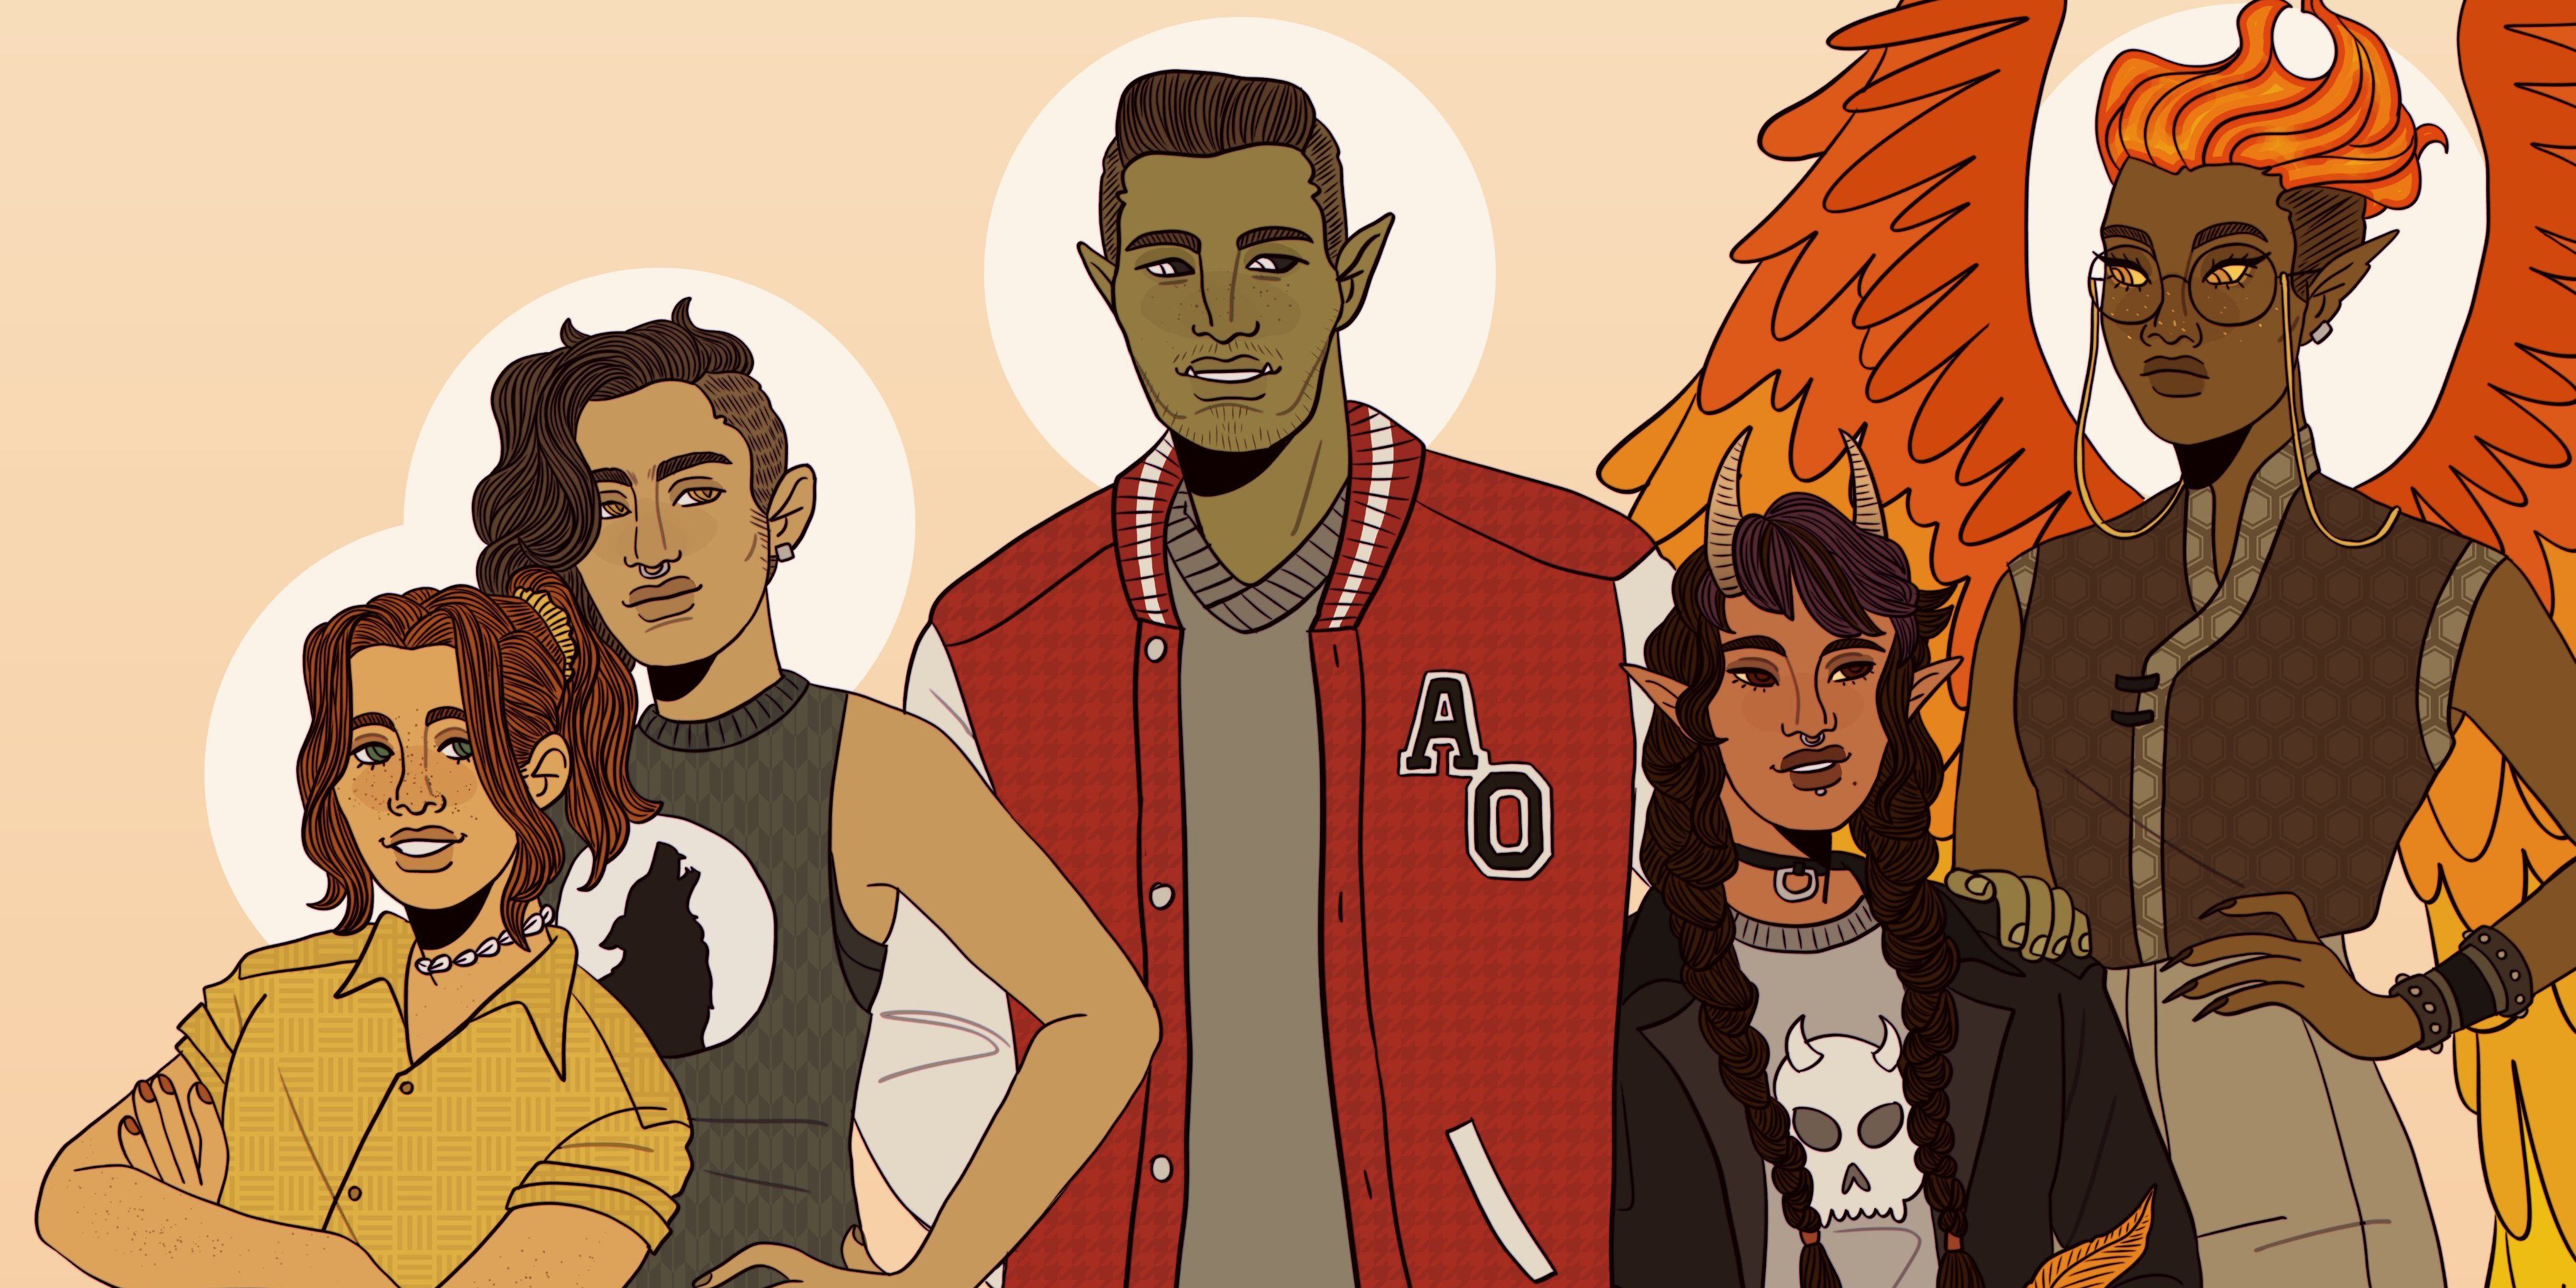 The LGBTQ members of the Bad Kids from Fantasy High.